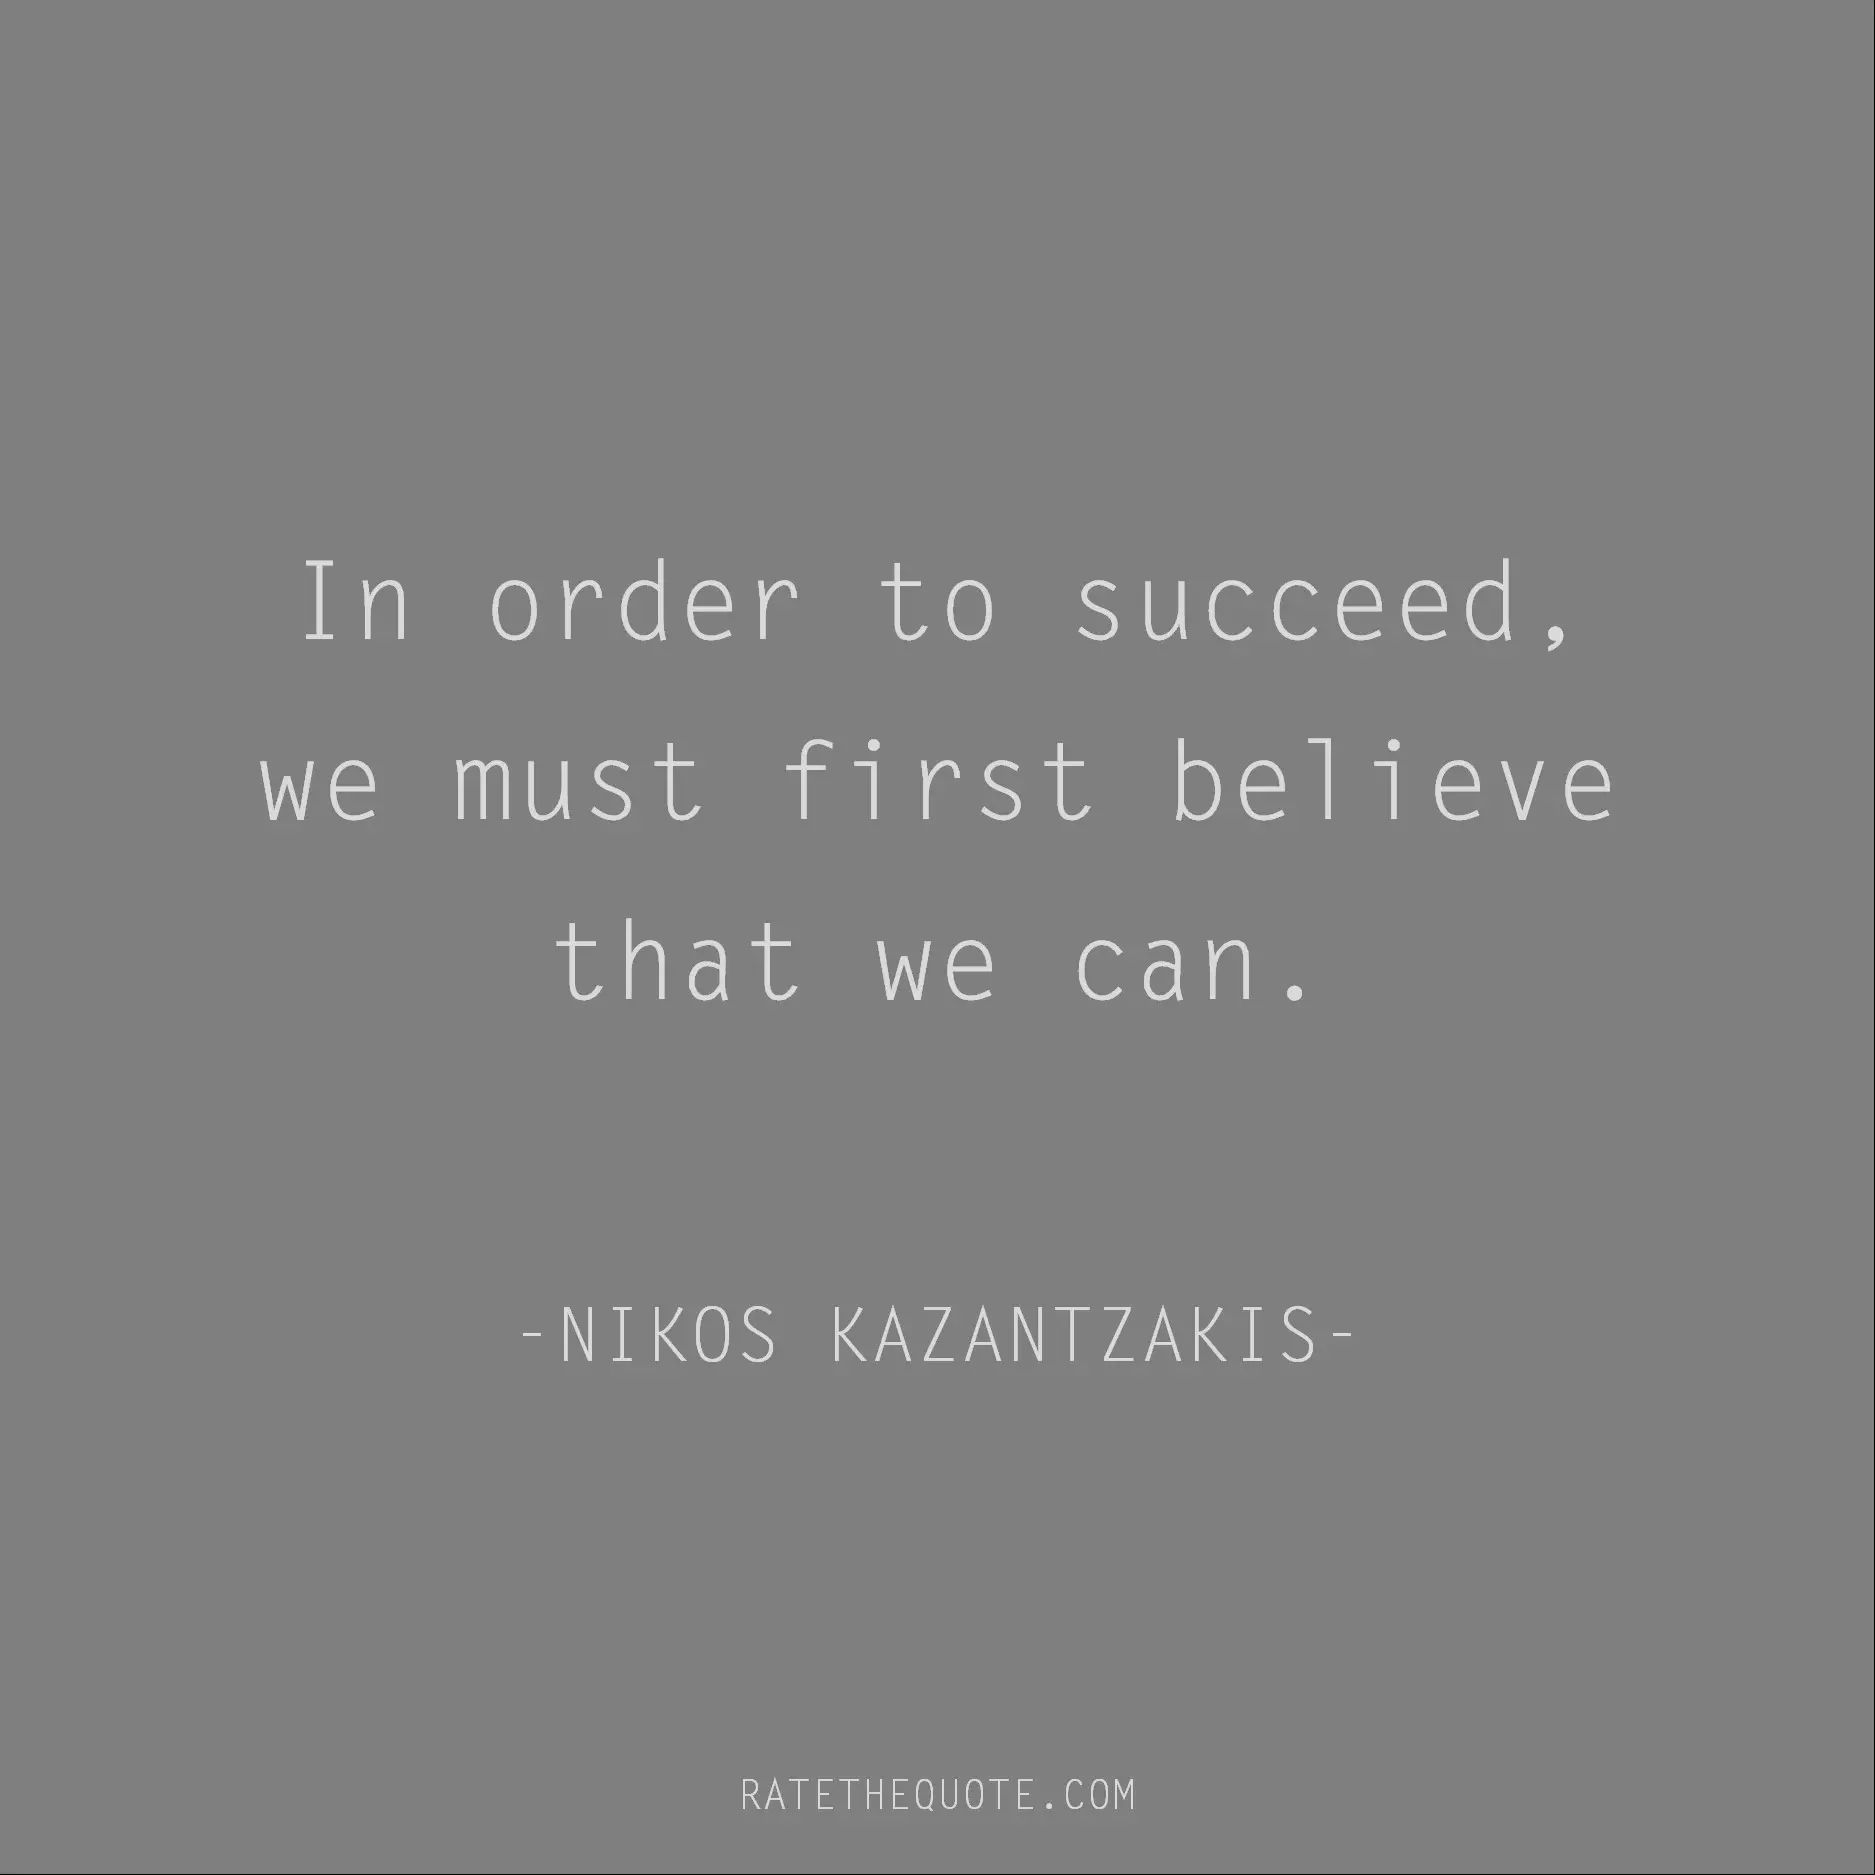 Motivational Quotes In order to succeed, we must first believe that we can. -NIKOS KAZANTZAKIS-